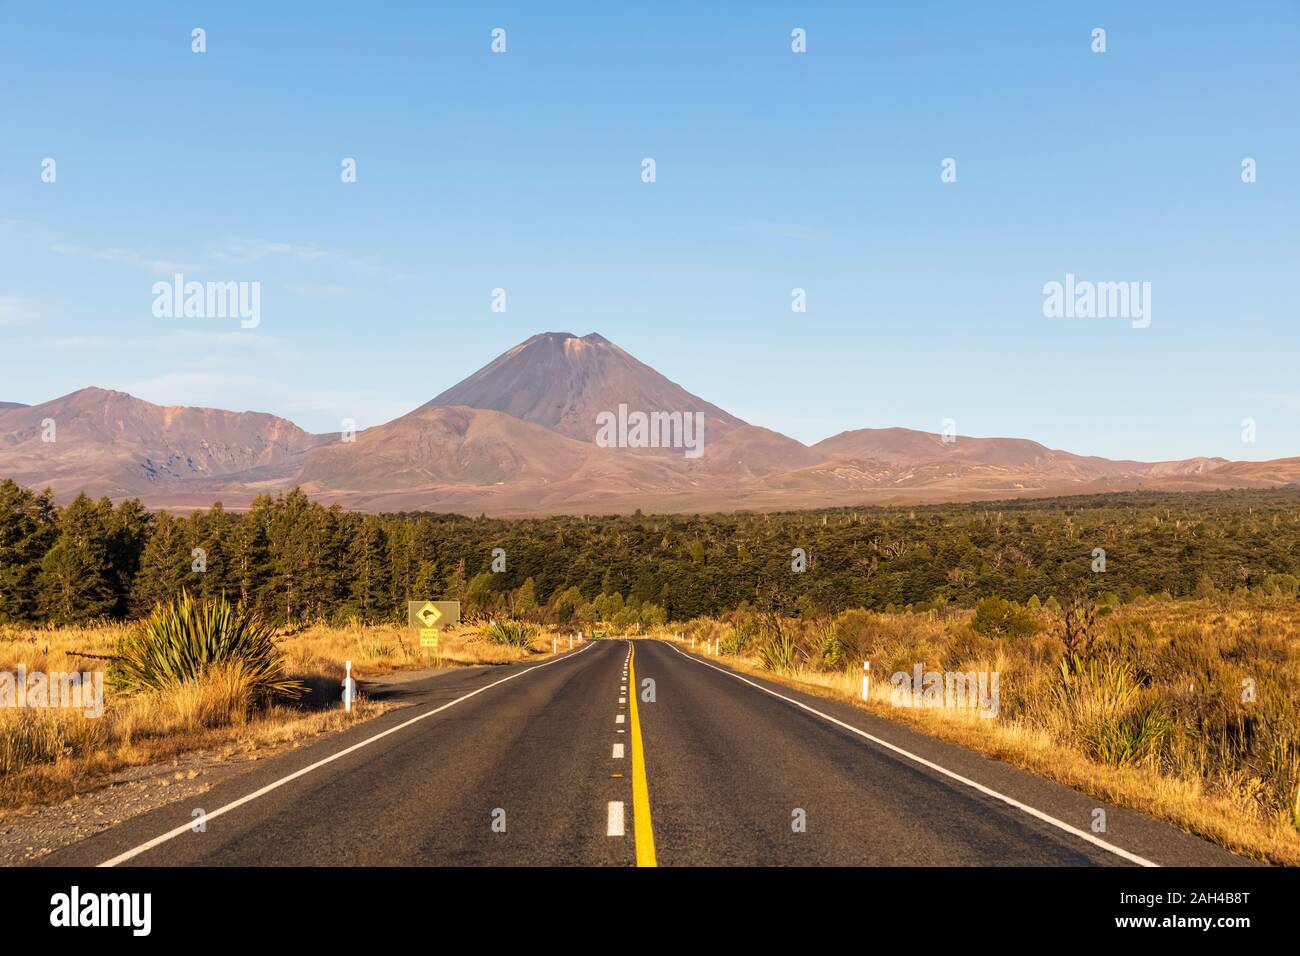 New Zealand, North Island, Diminishing perspective of State Highway 48 with Mount Ngauruhoe looming in background Stock Photo